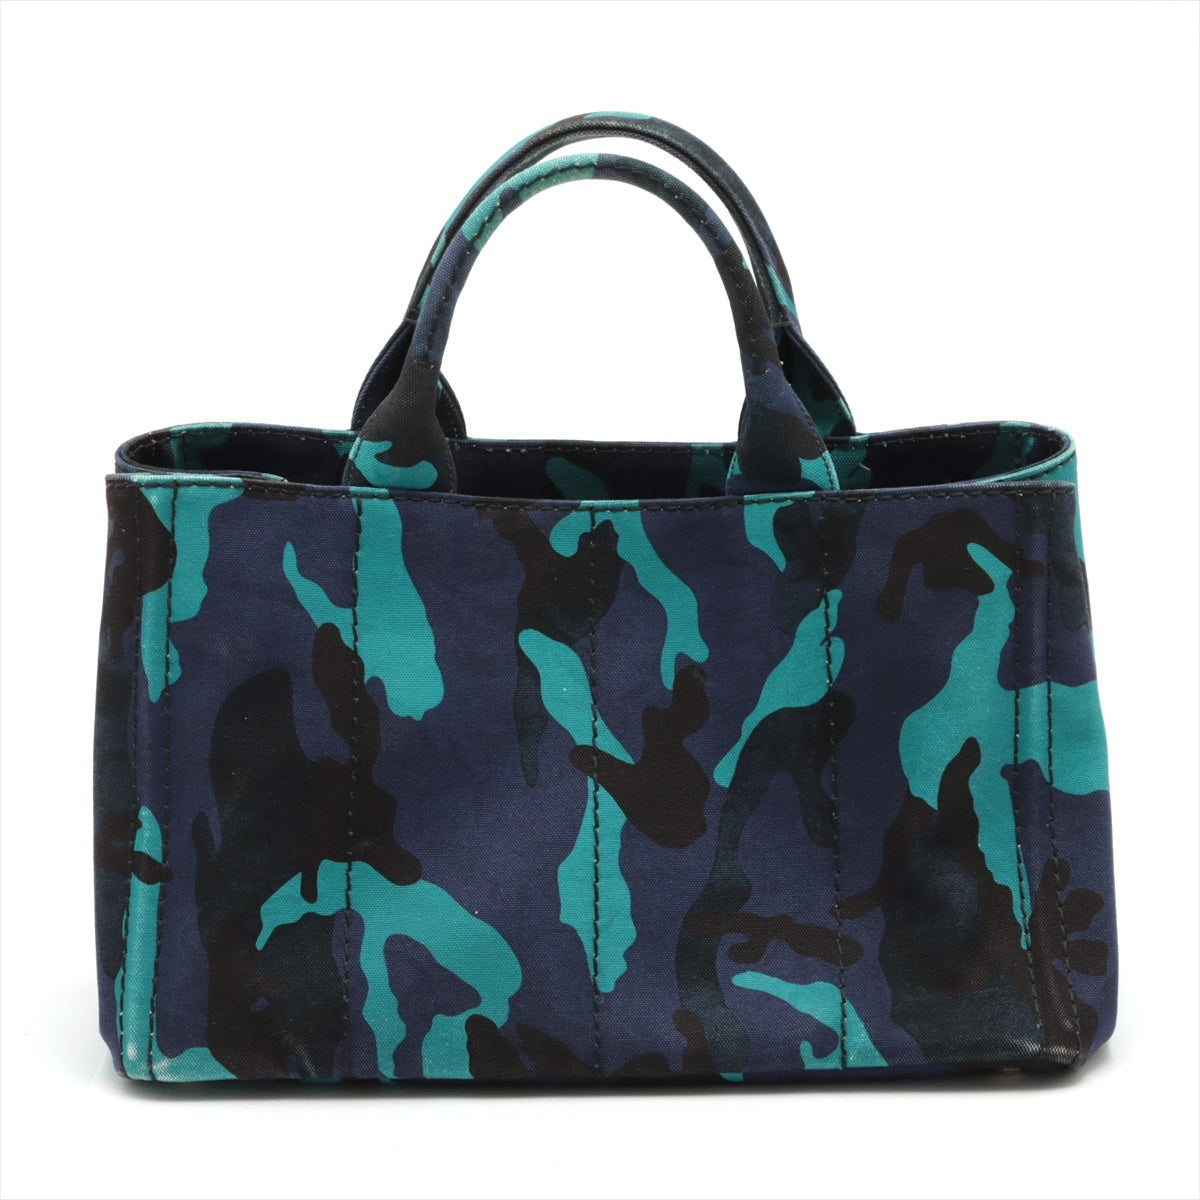 Prada Canapa canvass 2 way tote bag Blue 1BG439 open papers